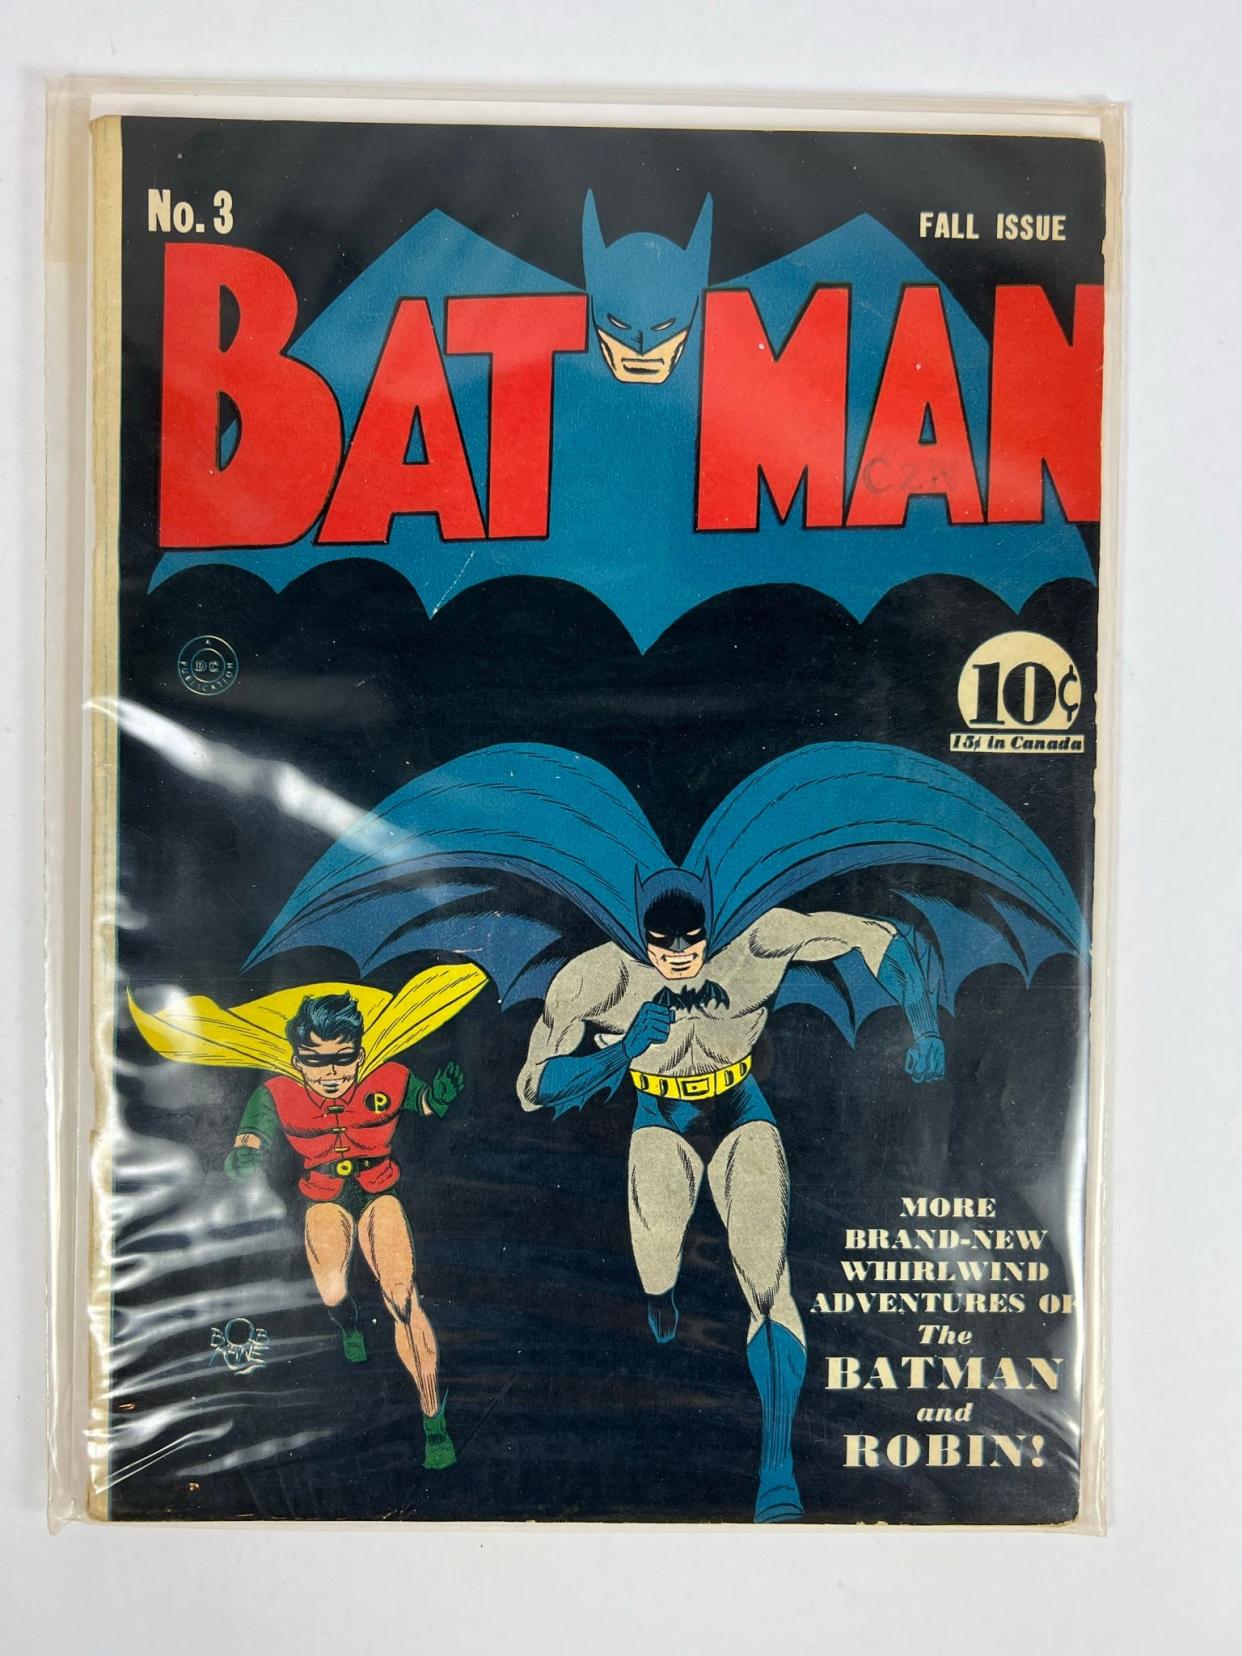 Batman No. 3 from 1940 currently has a high bid of $4,600 at the estate auction to benefit the University of New Hampshire Scholarship Fund.